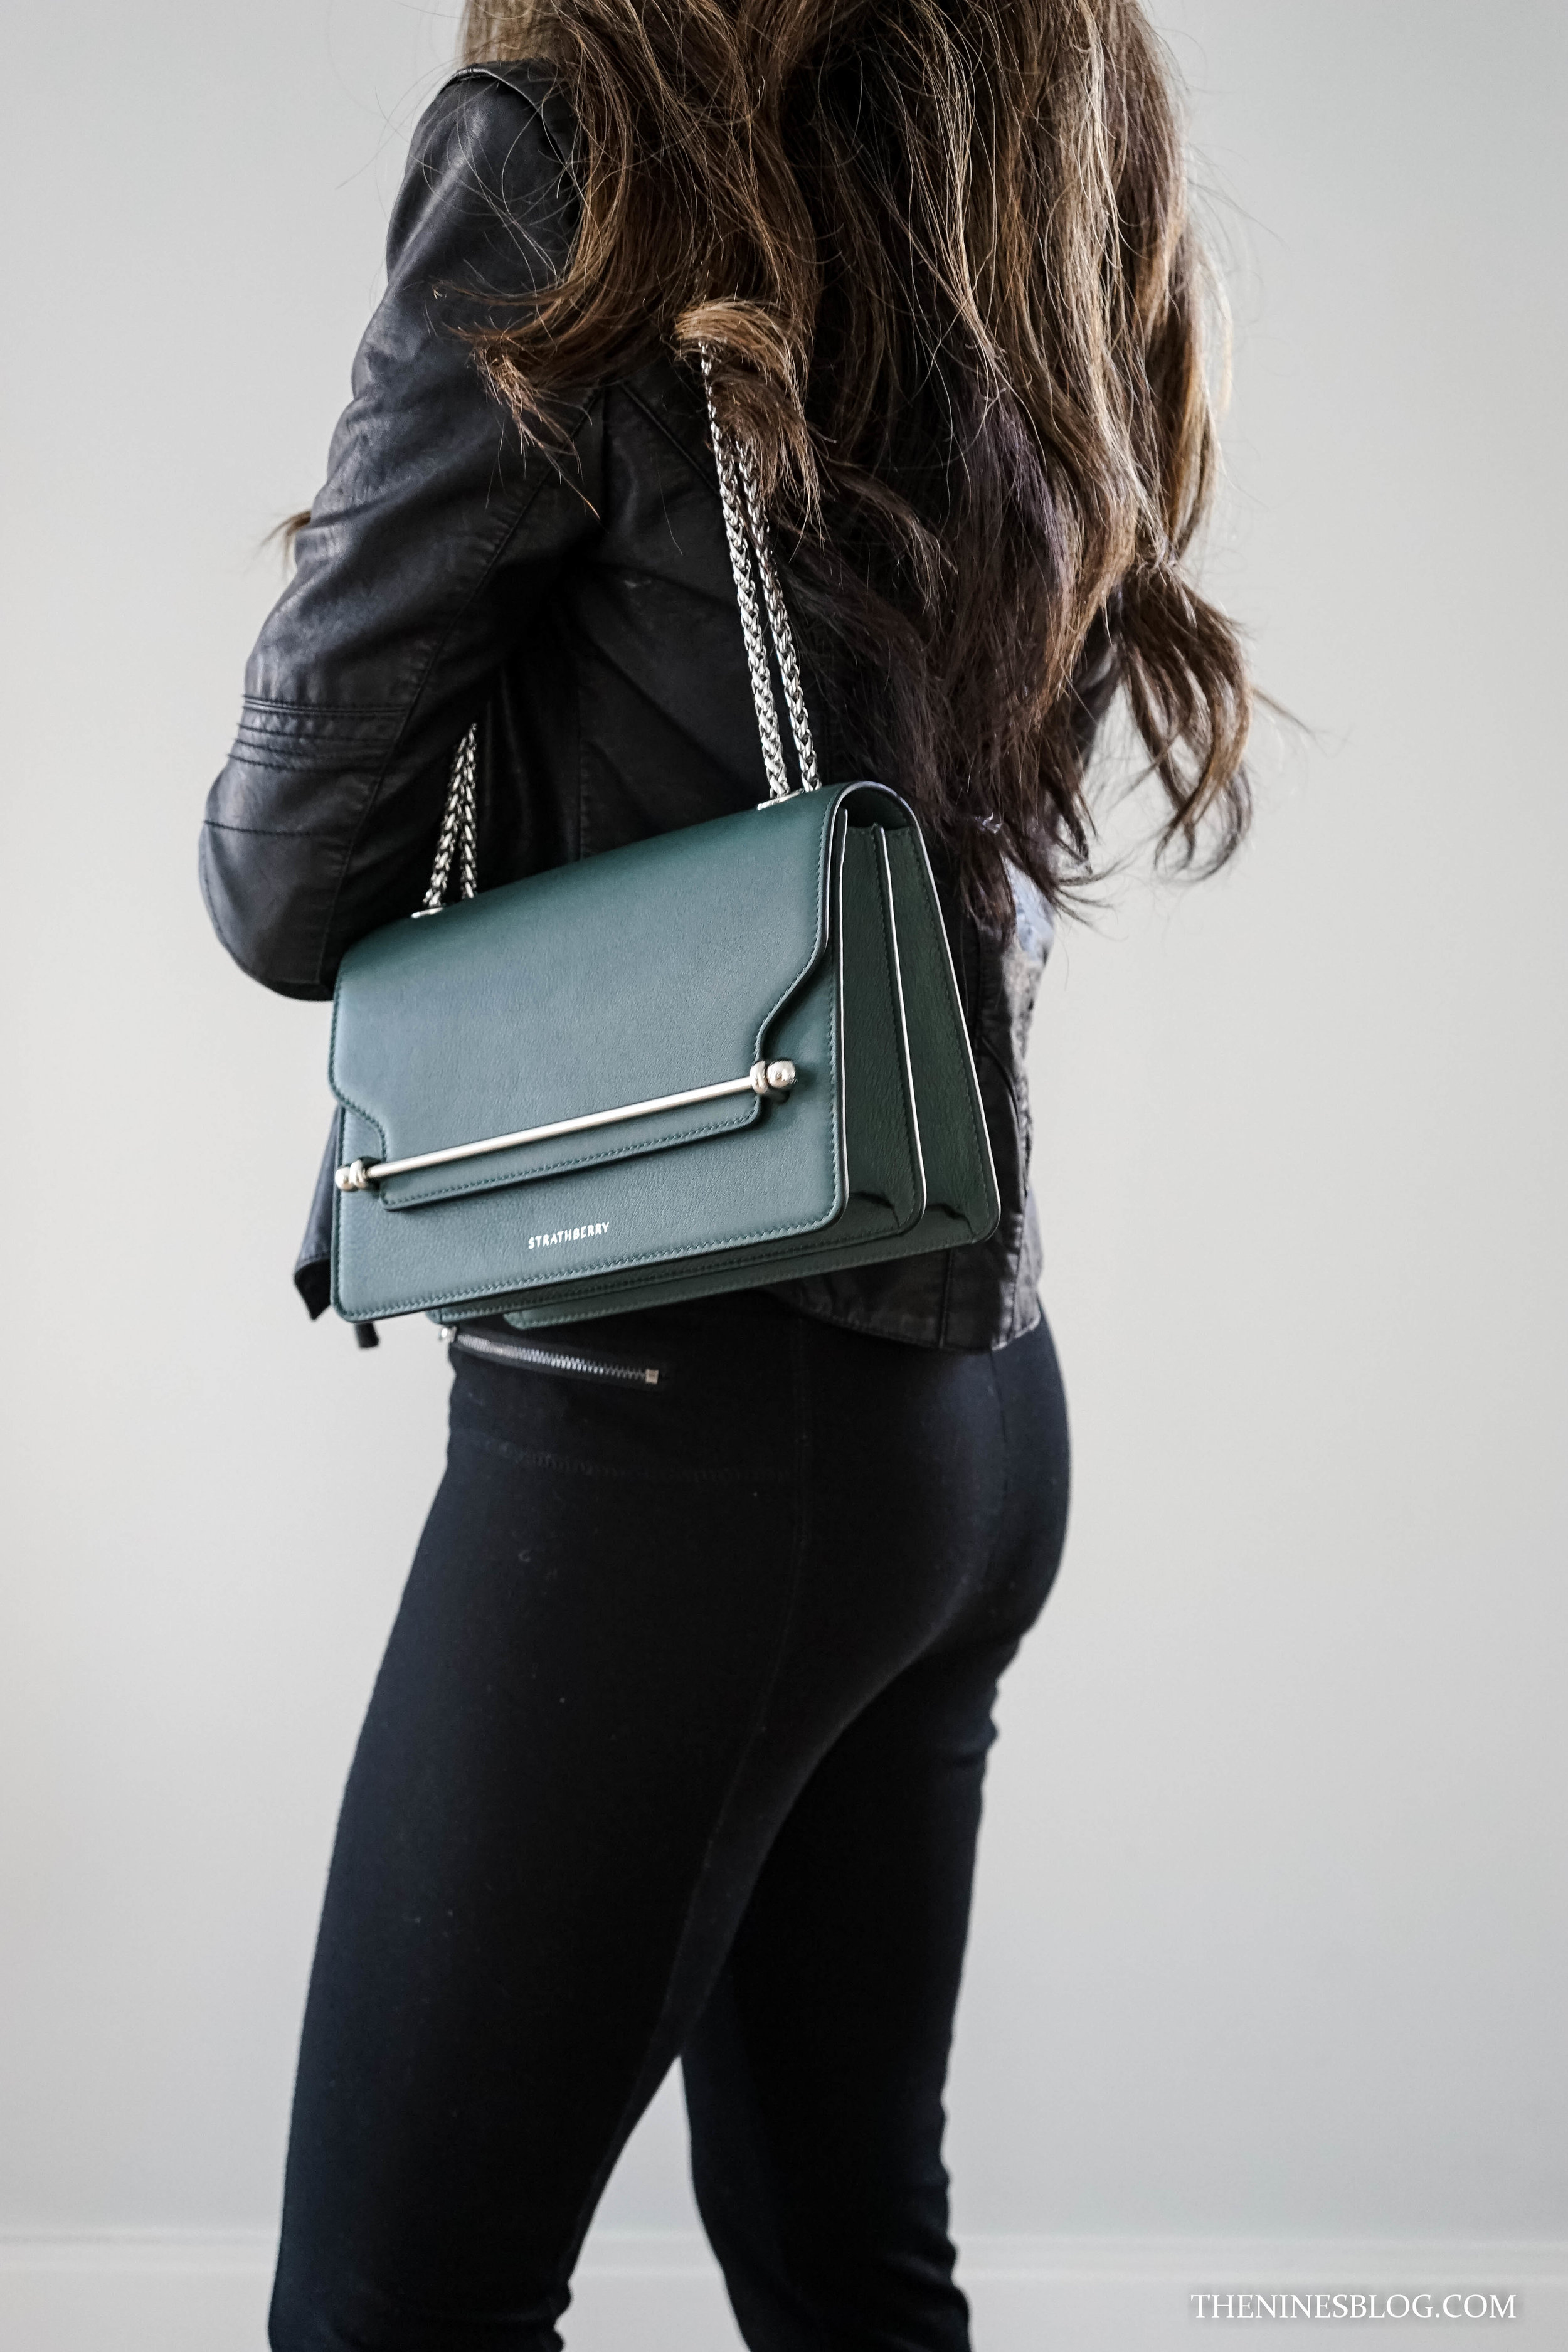 Strathberry East/West Mini Bag Review - Karina Style Diaries